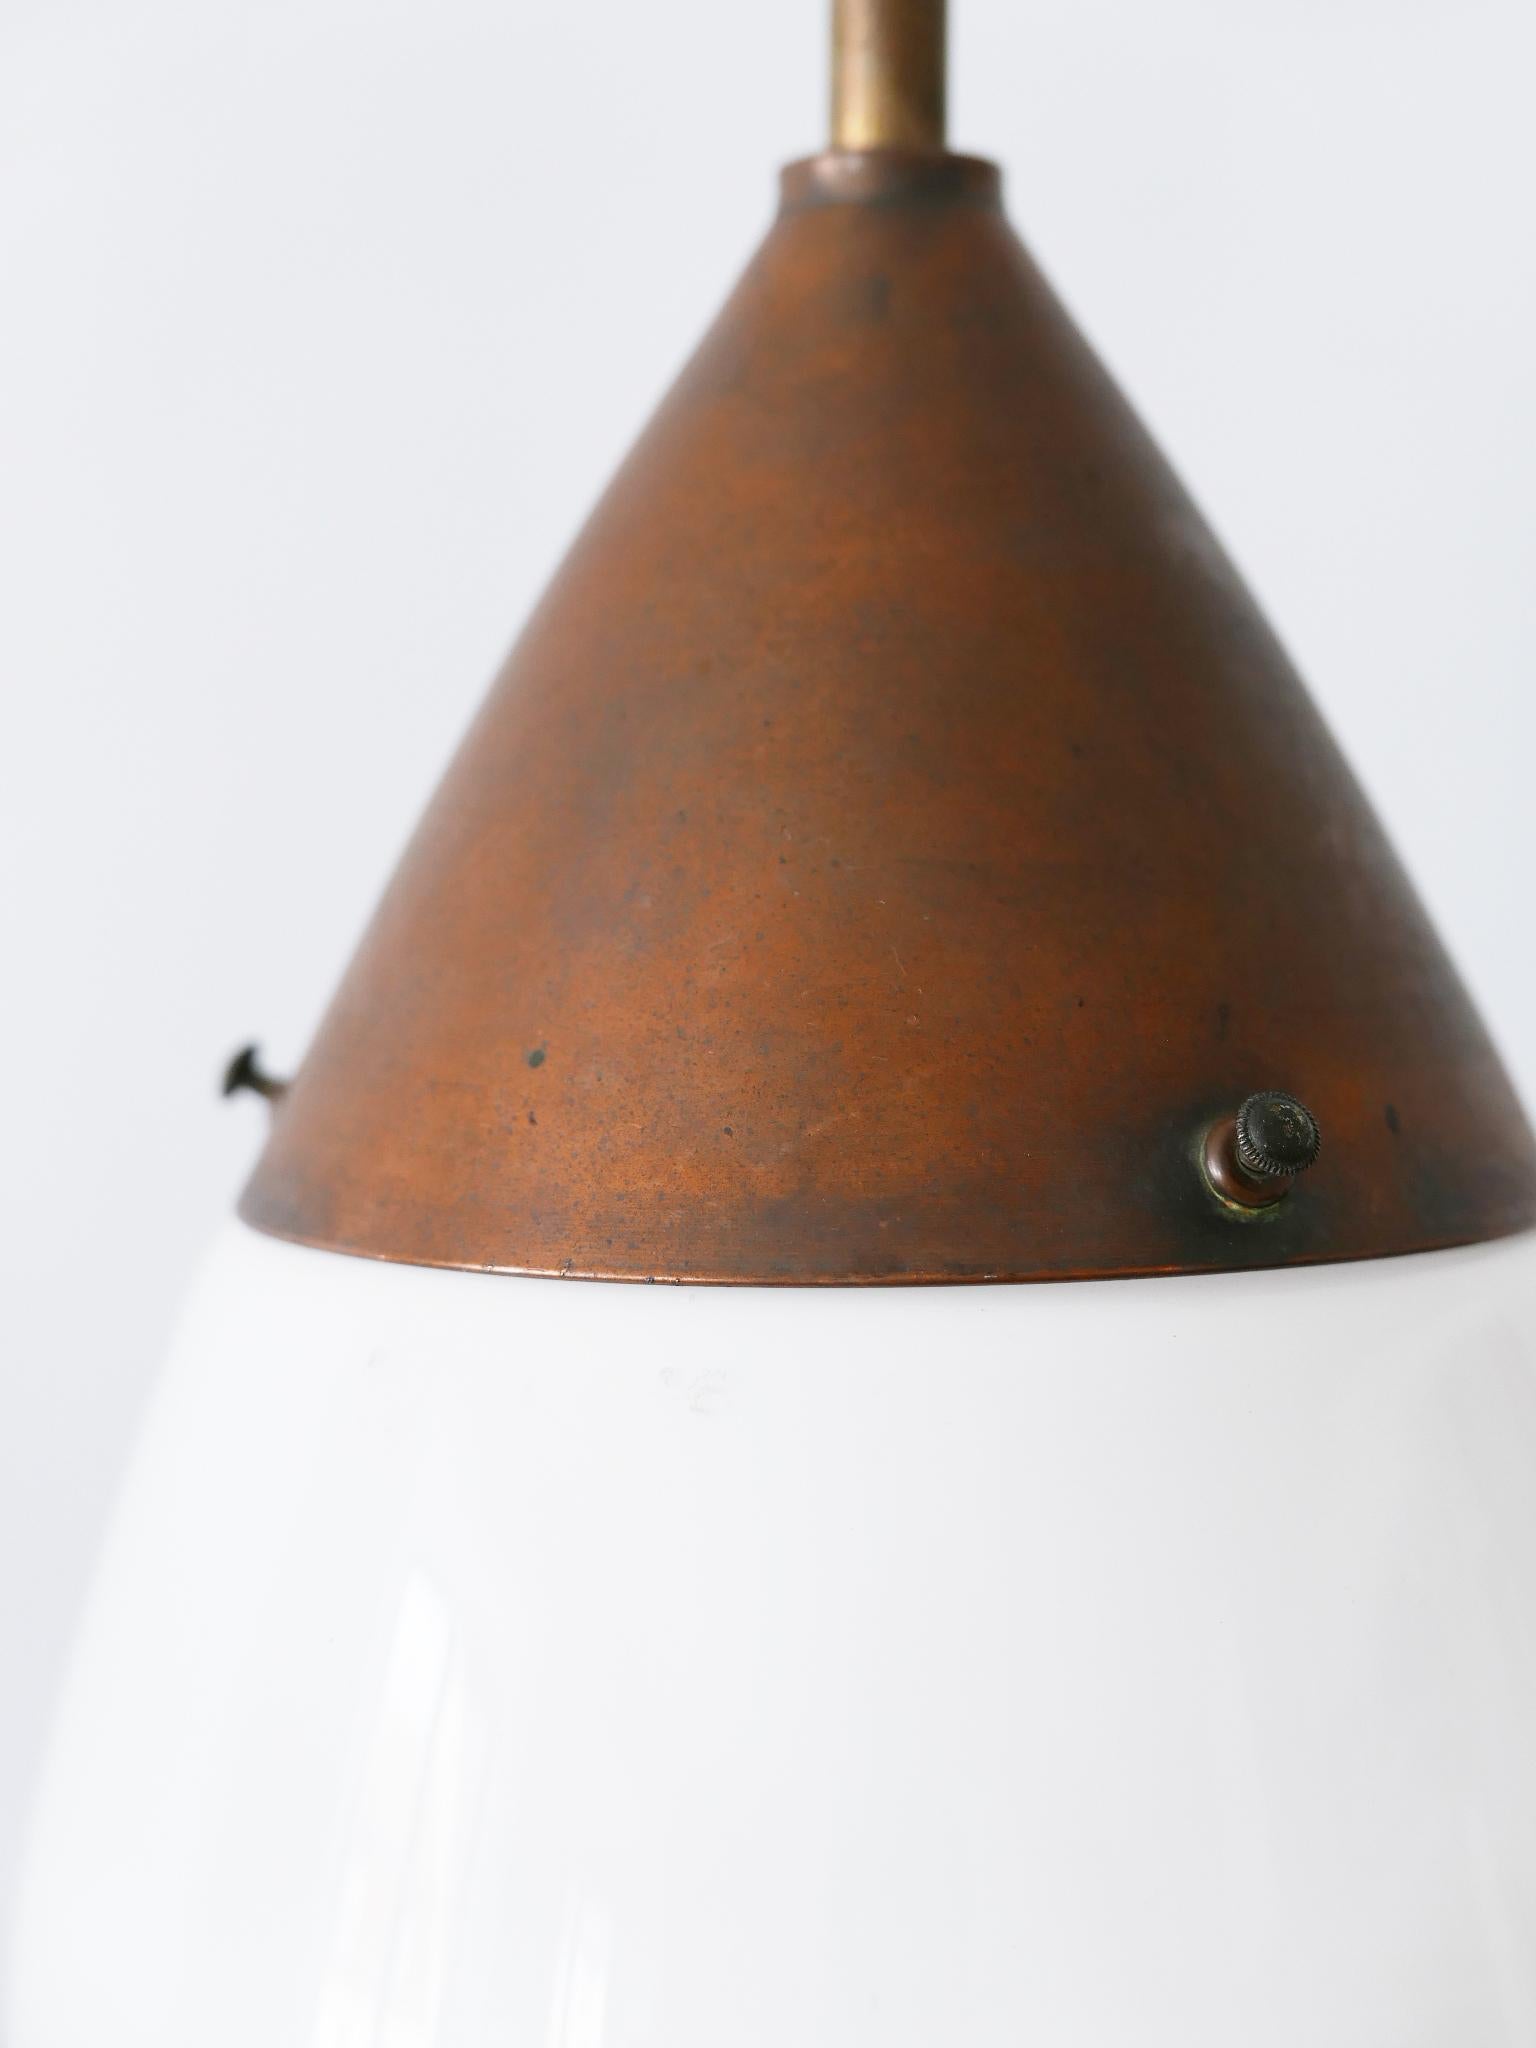 Exceptional Bauhaus Pendant Lamp or Hanging Light Drop by Siemens 1920s, Germany For Sale 12